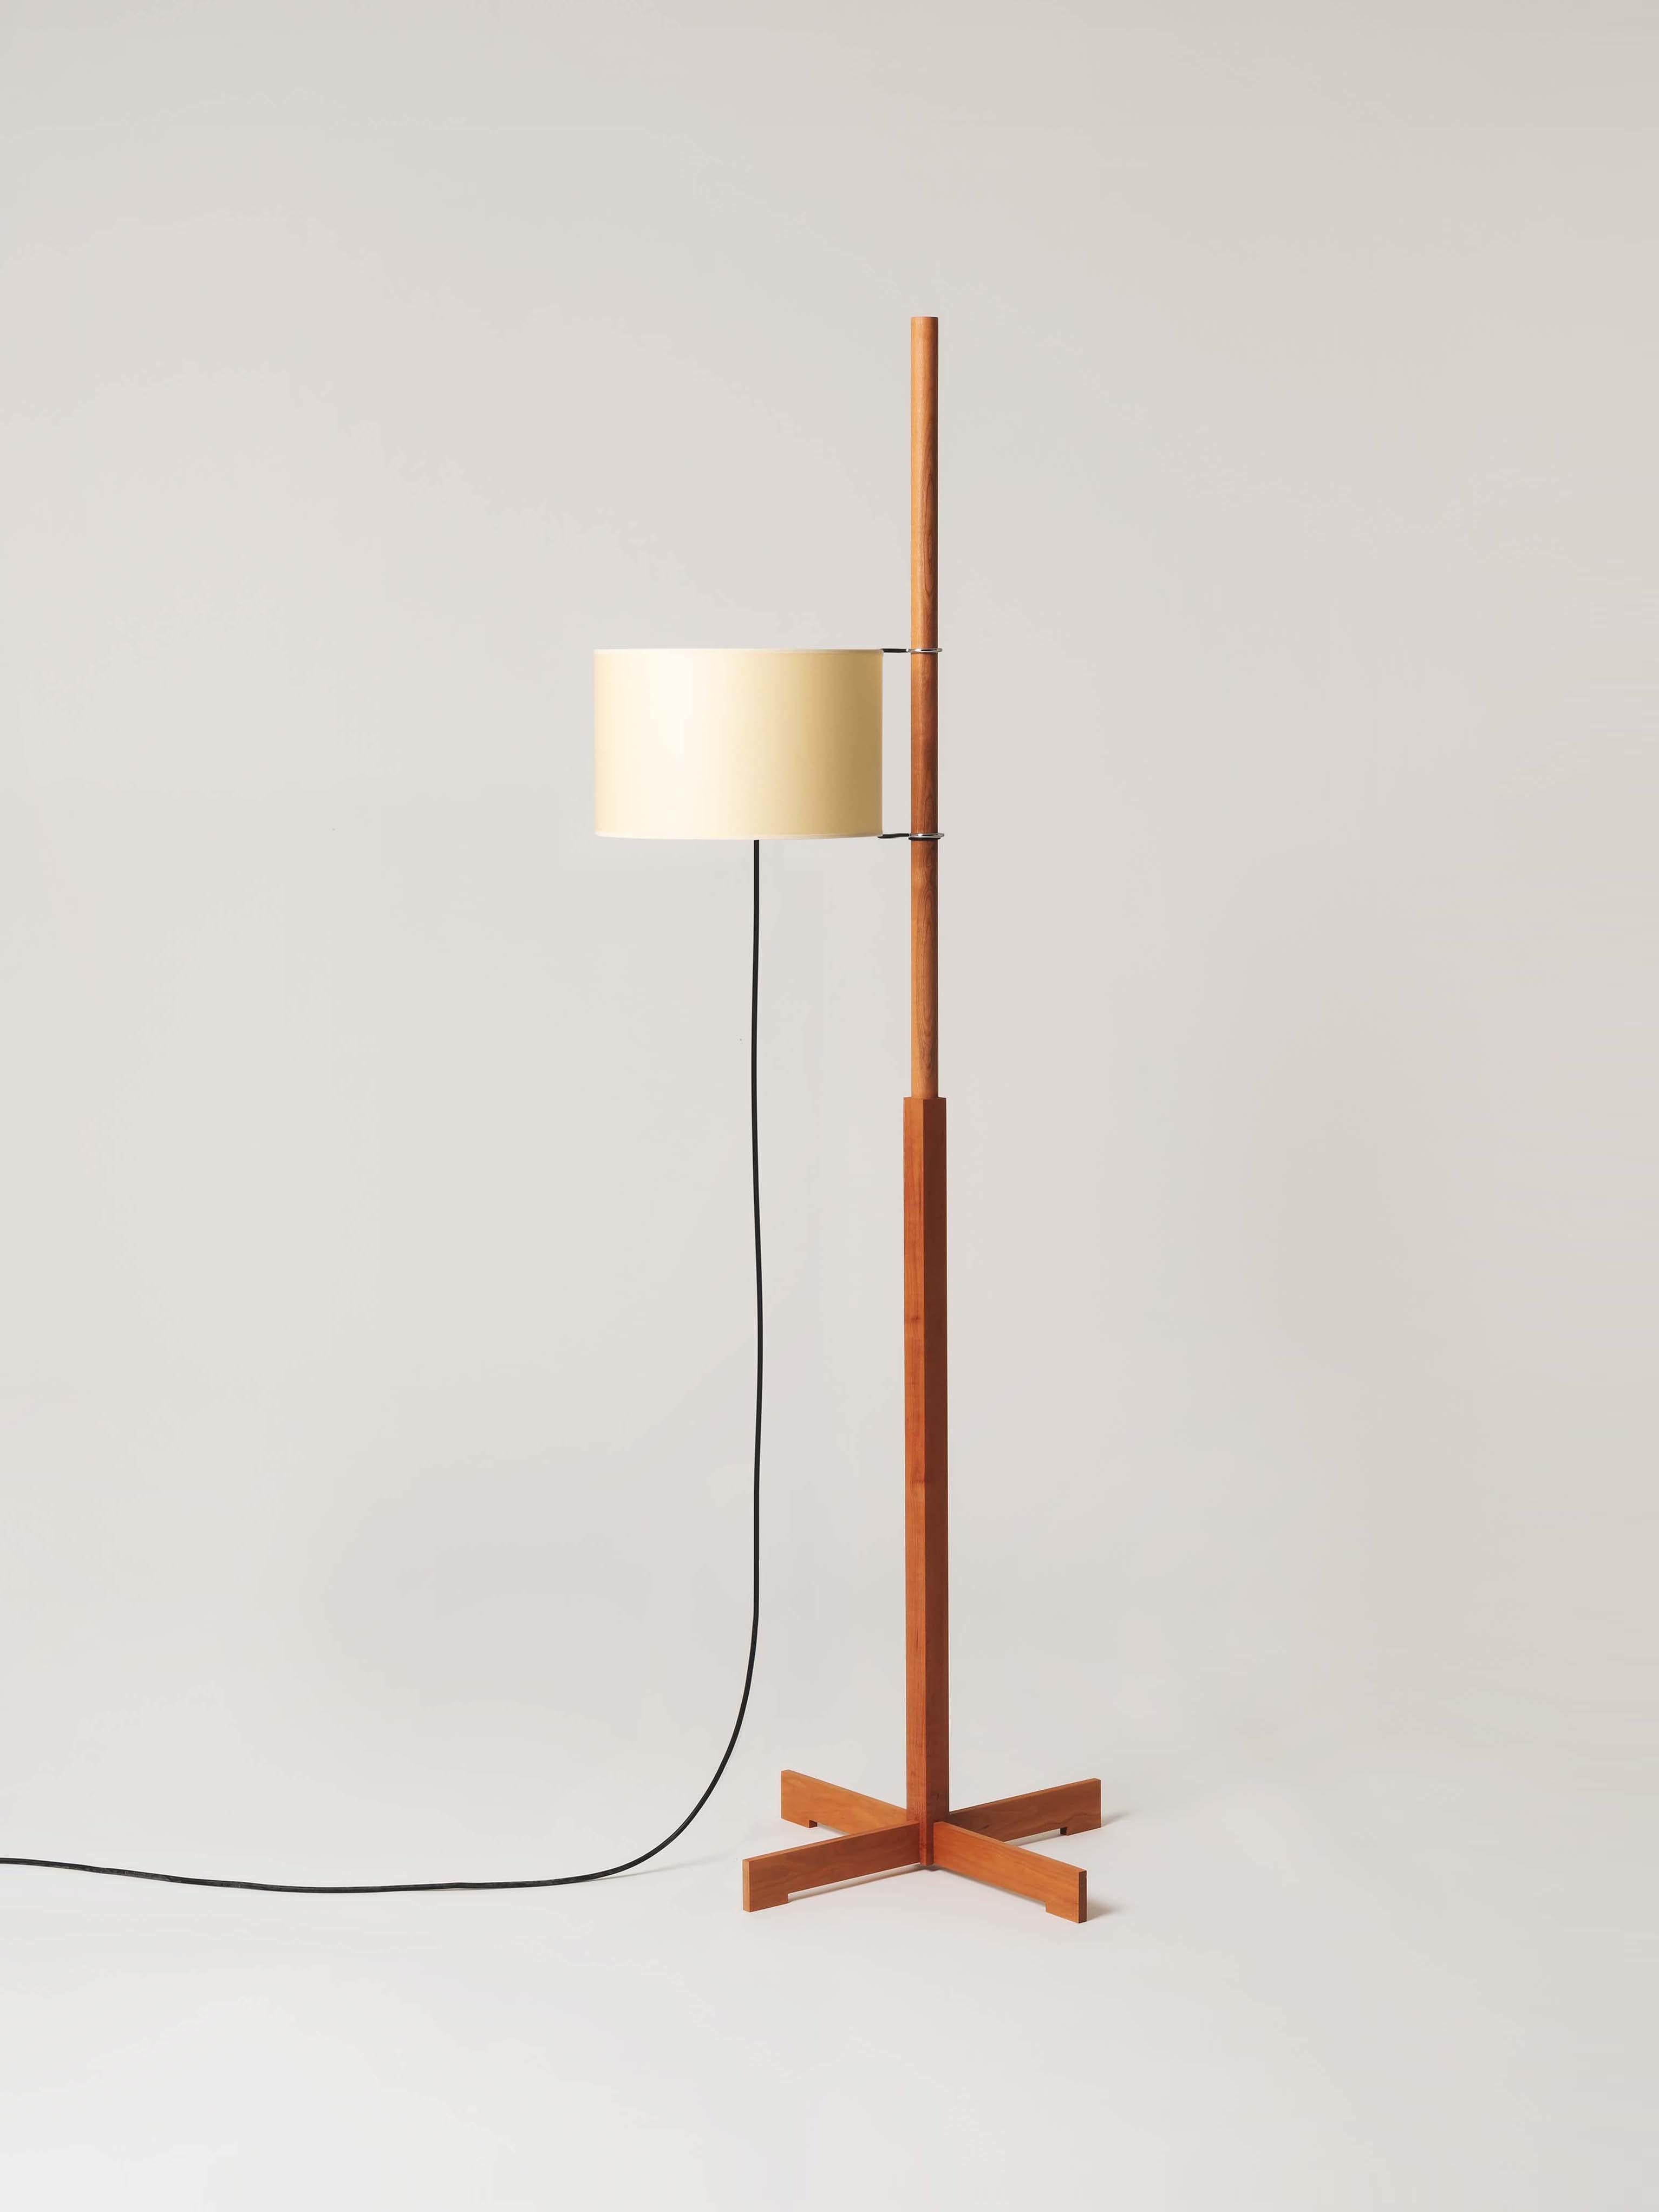 Beige and cherry TMM floor lamp by Miguel Milá
Dimensions: d 50 x w 60 x h 166 cm
Materials: Cherry wood, parchment lampshade.
Available in 3 lampshades: beige, white and white with diffuser.
Available in 5 woods: beech, cherry, walnut, natural